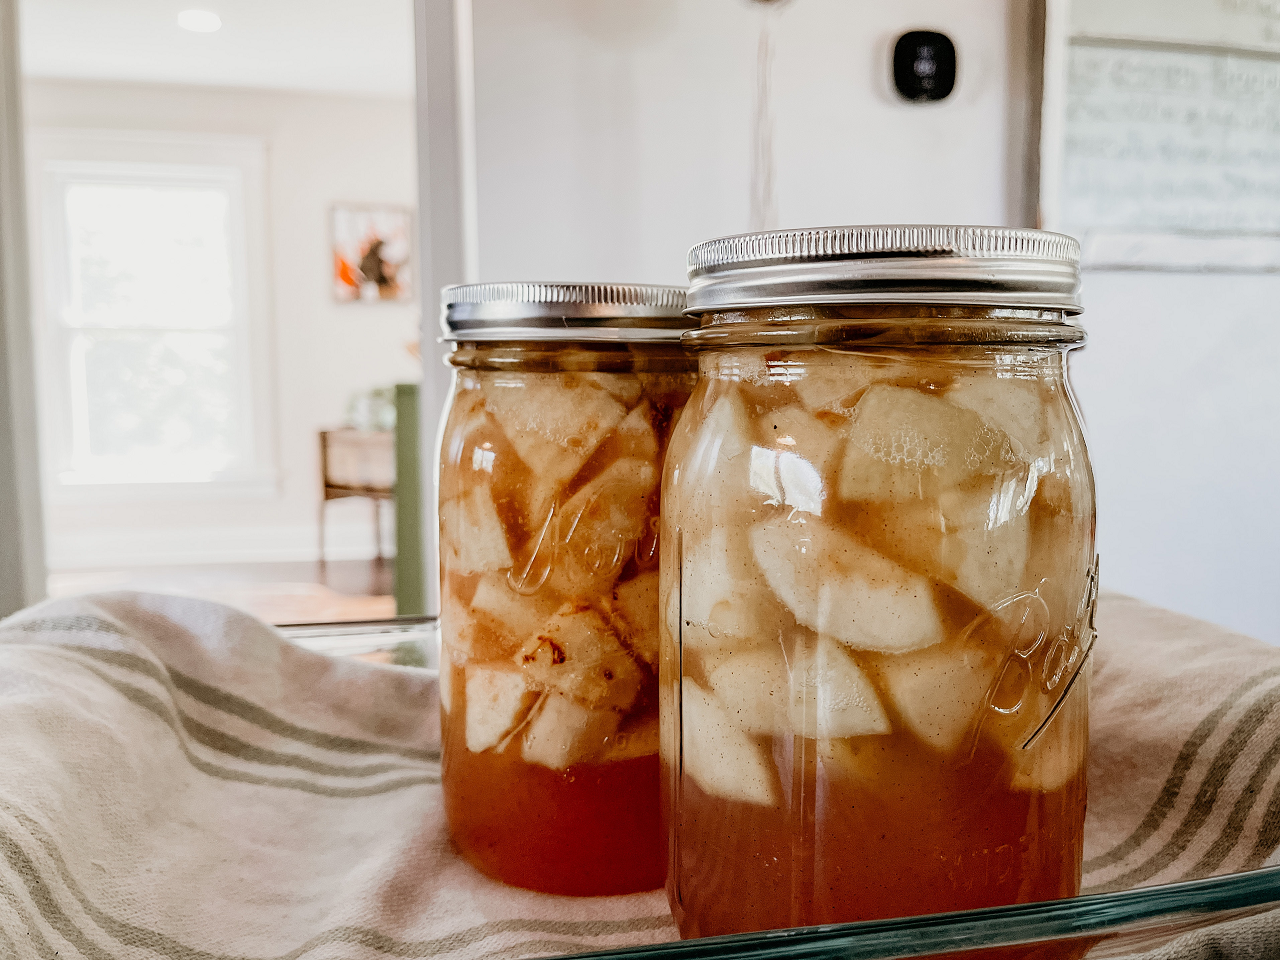 Image of apples in canning jars ready to be stored.